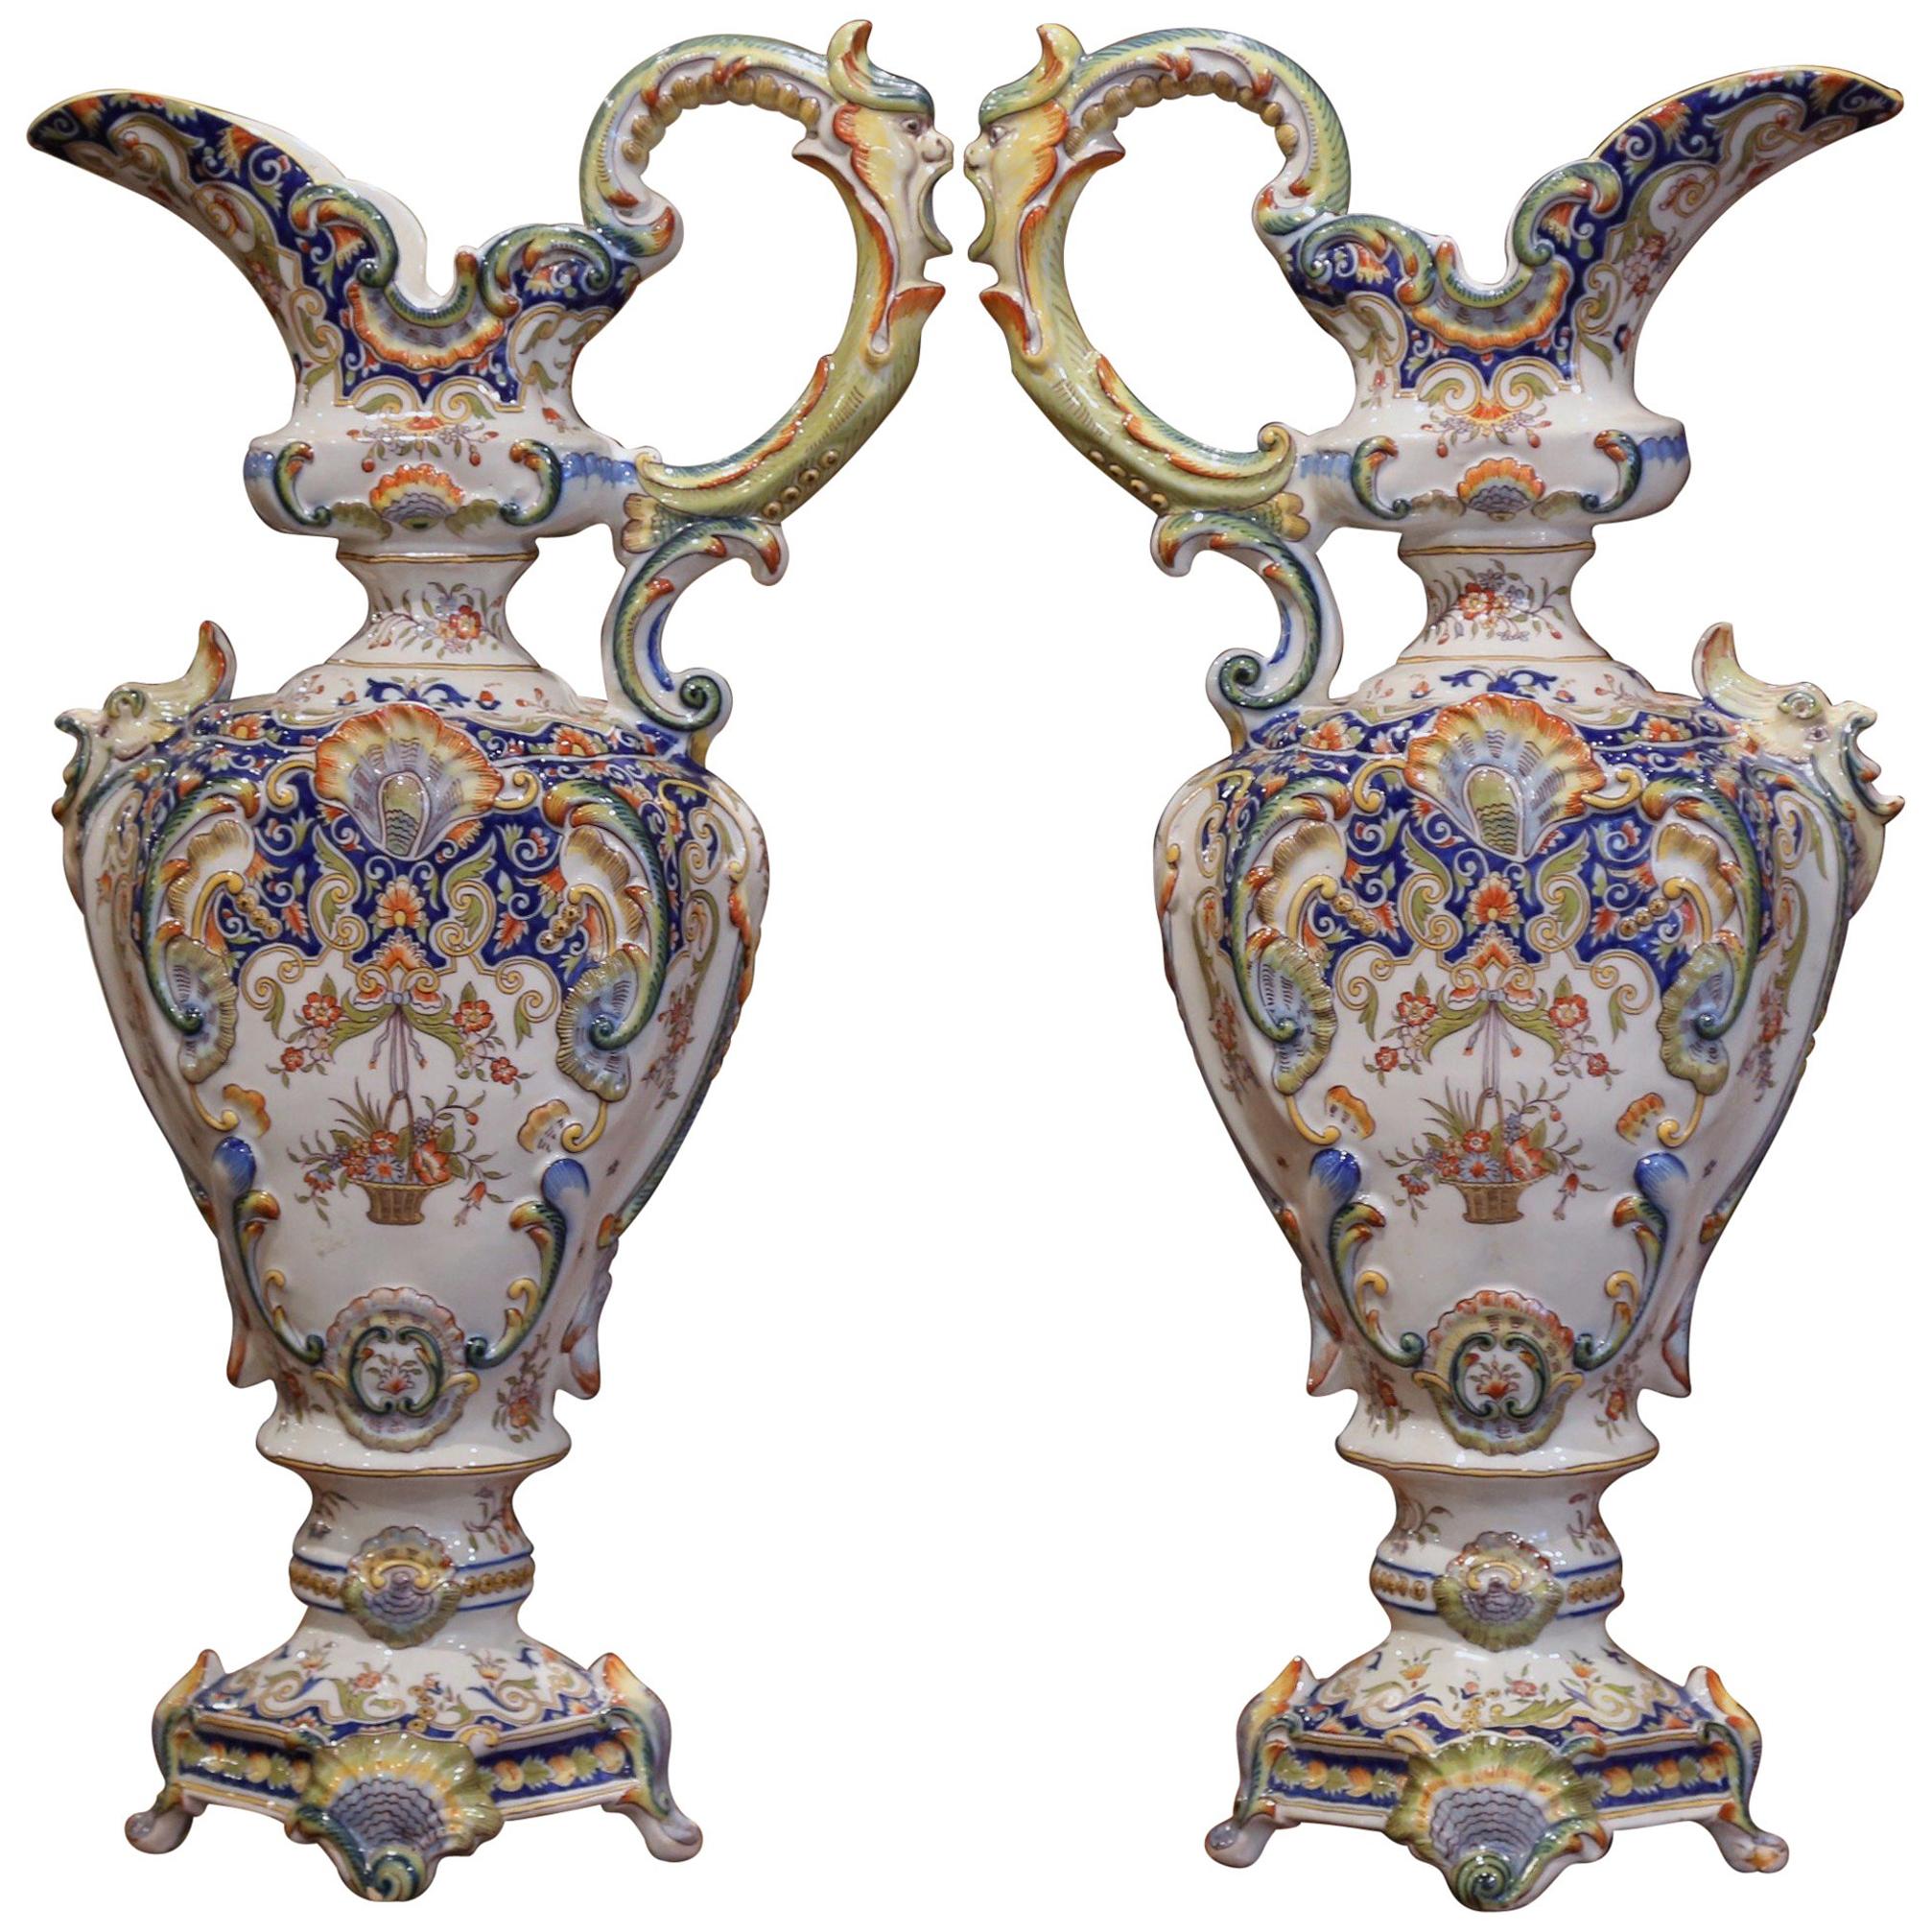 Pair of 19th Century French Hand Painted Faience Ewers Jars from Rouen